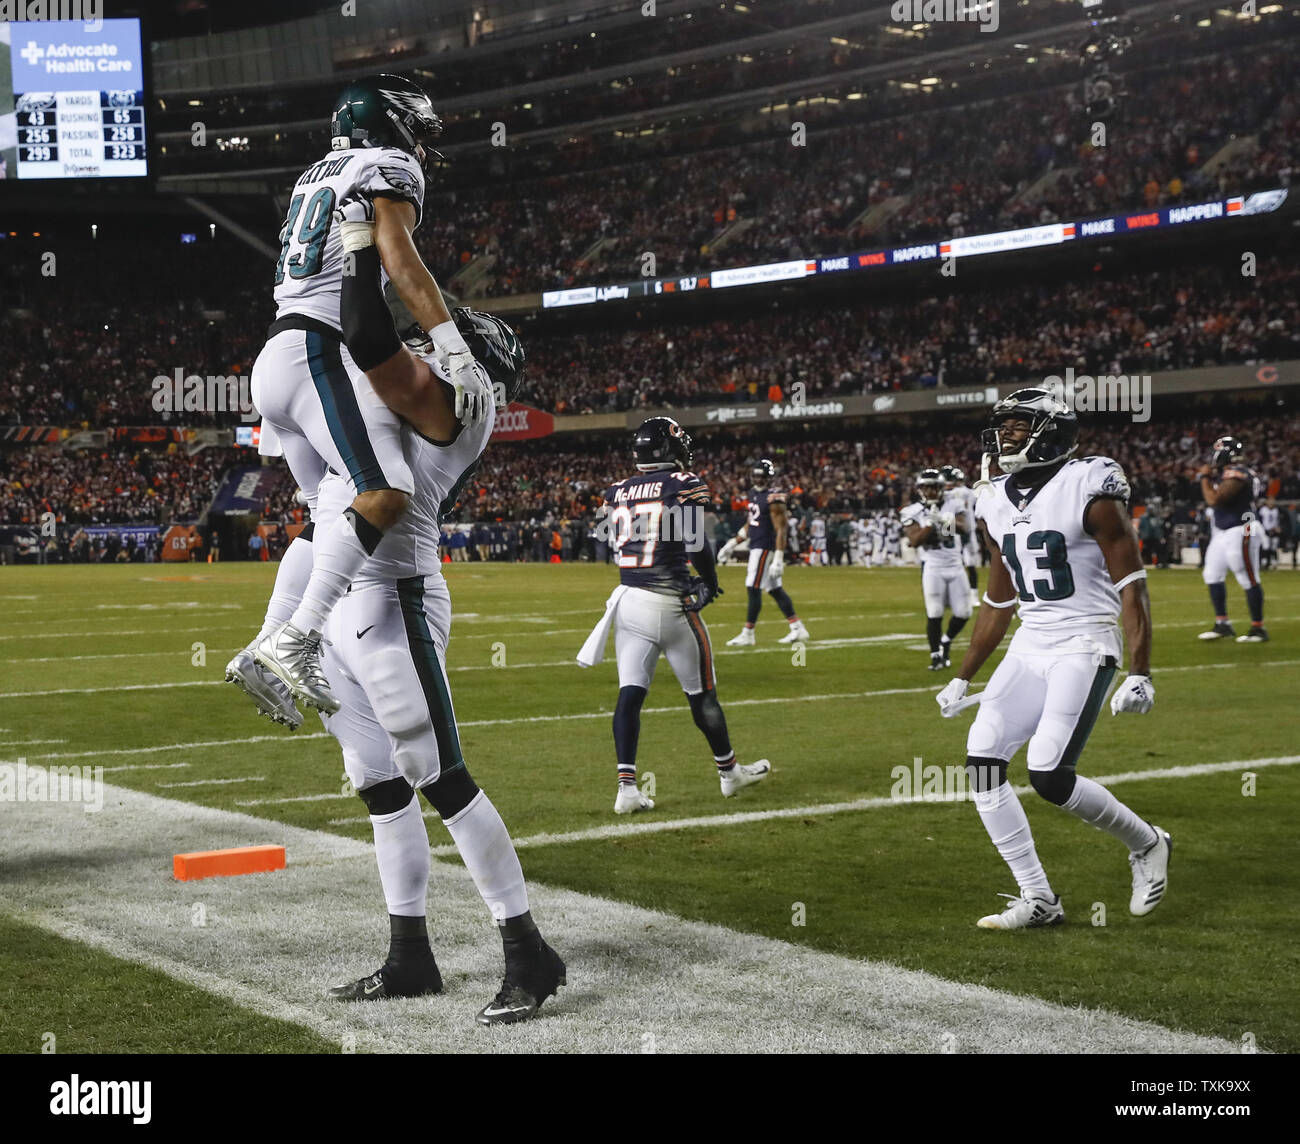 Philadelphia Eagles wide receiver Golden Tate (19) celebrates with offensive tackle Lane Johnson (65) after scoring the game-winning touchdown in the final minute of the game against Chicago Bears NFC Wild Card playoff game at Soldier Field in Chicago on January 6, 2019.  Eagles won 16-15.   Photo by Kamil Krzaczynski/UPI Stock Photo